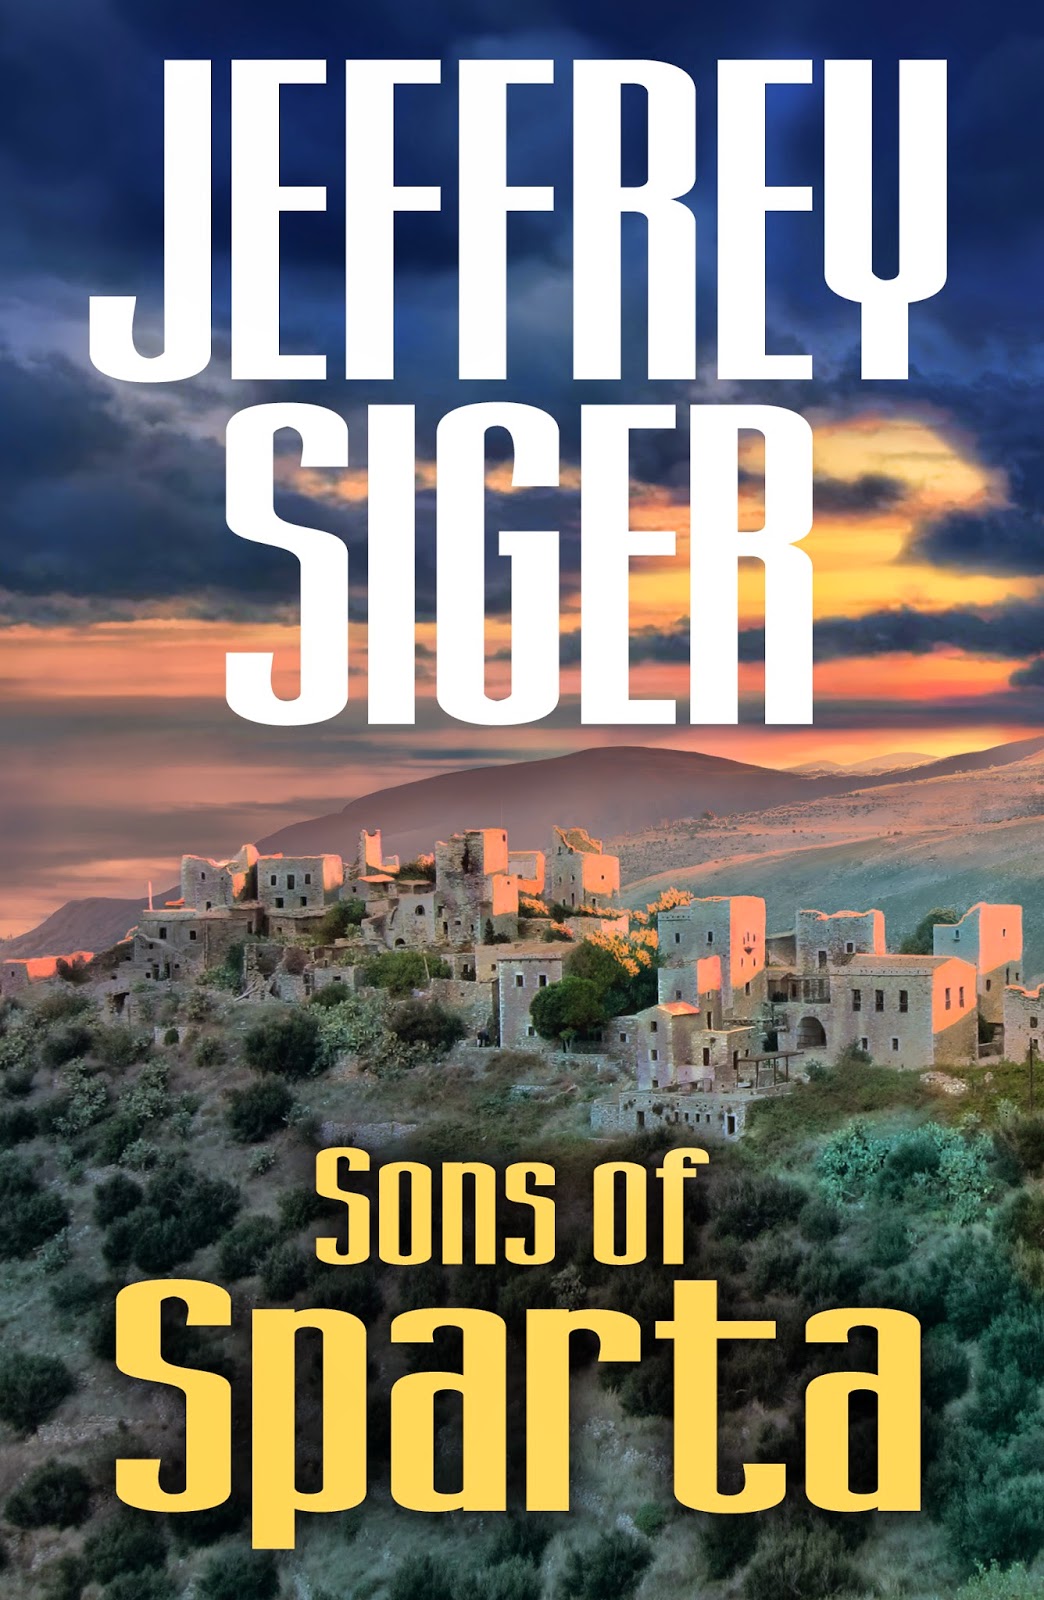 Sons of Sparta: A Chief Inspector Andreas Kaldis Mystery by Jeffrey Siger